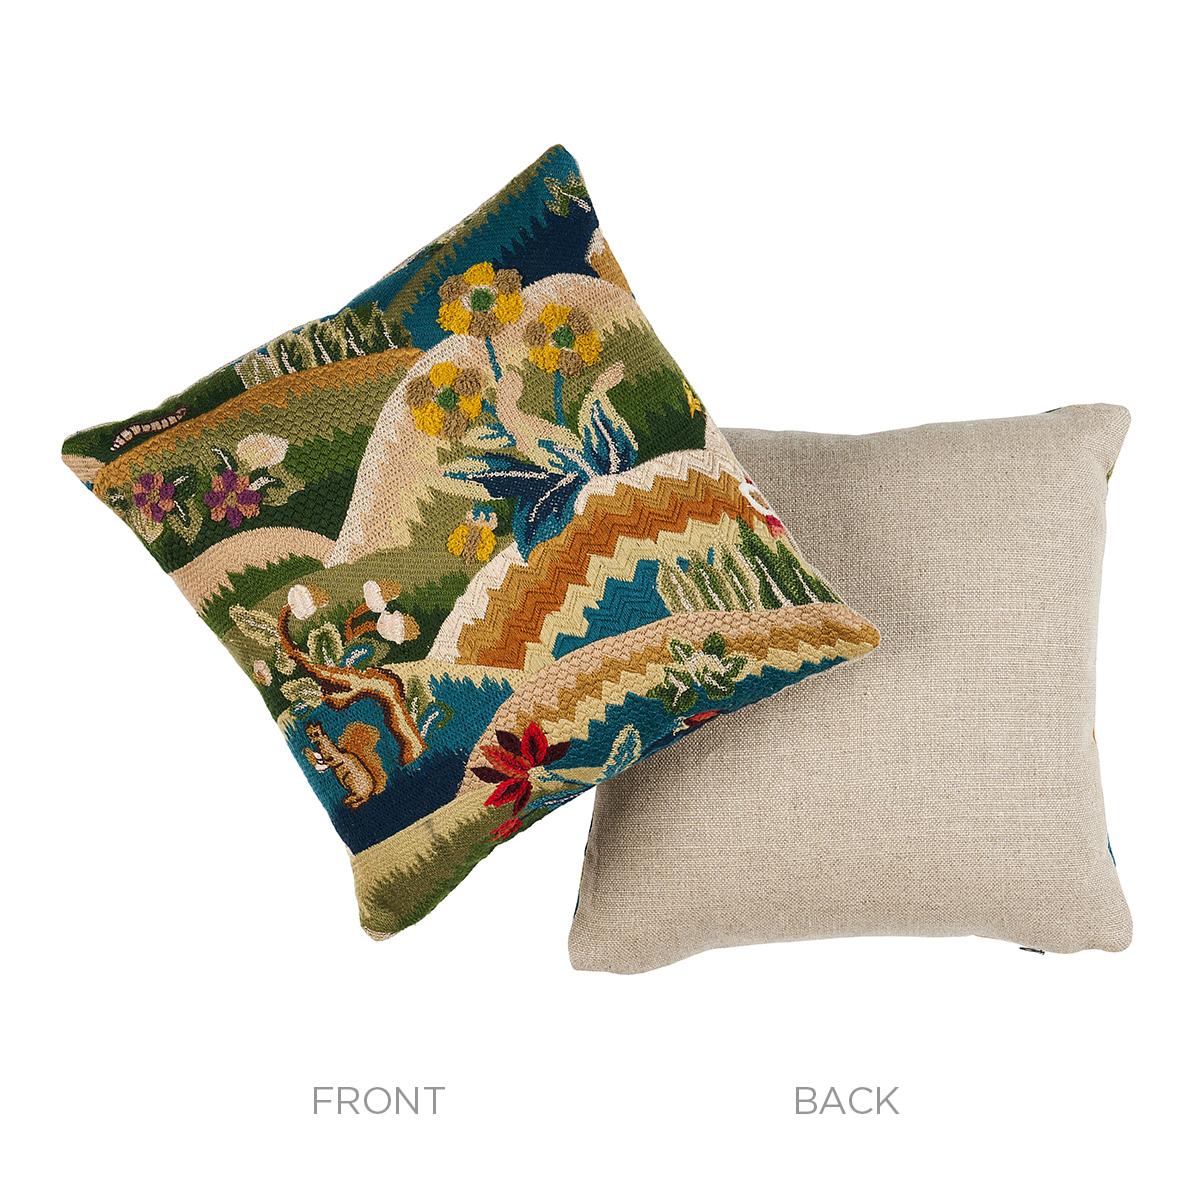 This pillow features Ananas with a knife edge finish. A lush landscape of pineapples nestled among banana leaves, Ananas was designed in 1930 by Paul Poiret exclusively for Schumacher. Pillow includes a feather/down fill insert and hidden zipper